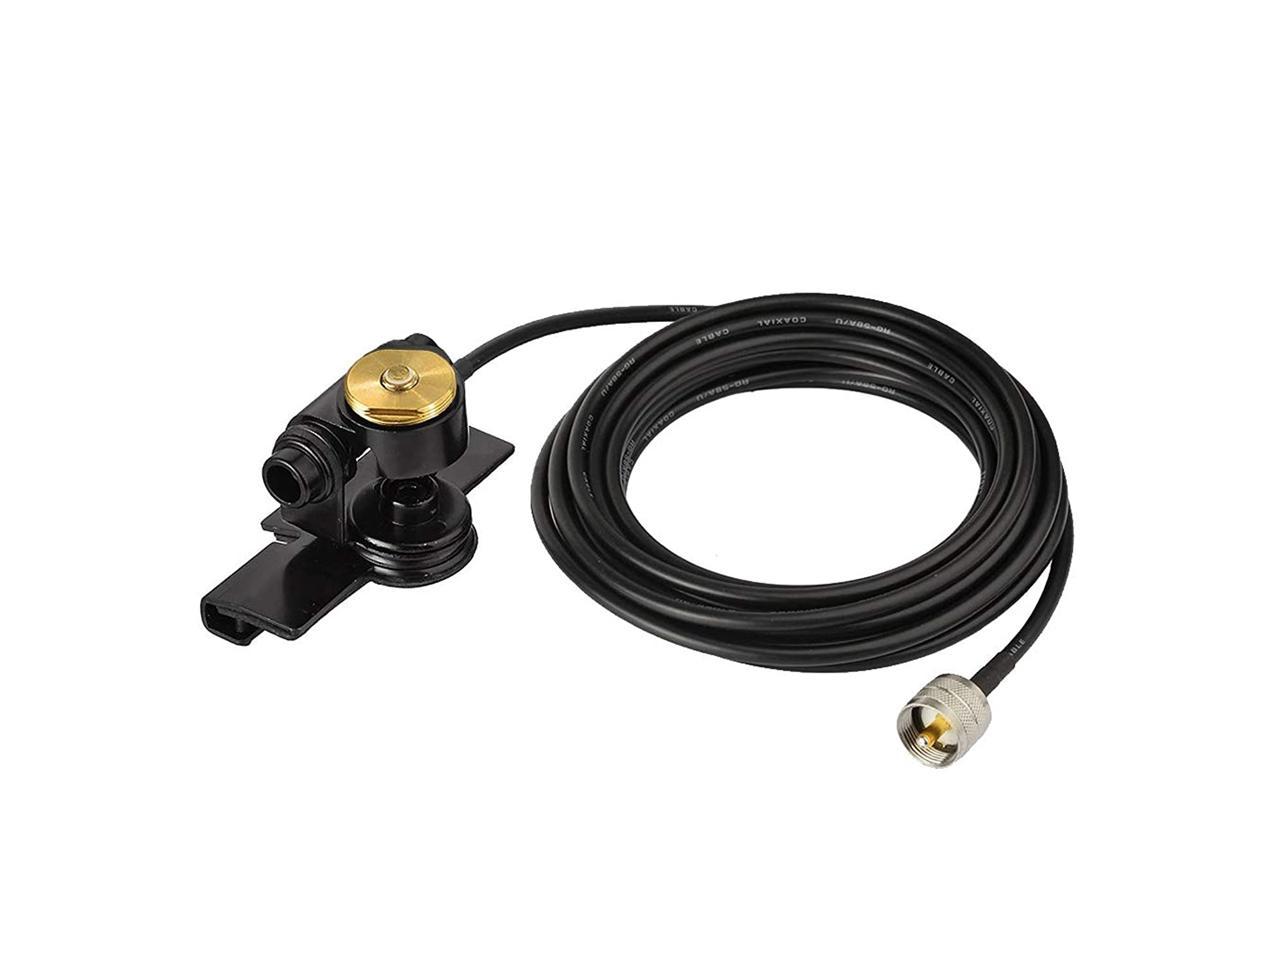 10ft Mount+L Bracket Solid Brass NMO Antenna Mount with UHF Male PL259 Connector 10 ft R58/U Coax Cable Plus NMO L Bracket 3/4 inches Hole for for Ham UHF VHF CB Cellular Trucker Antenna 